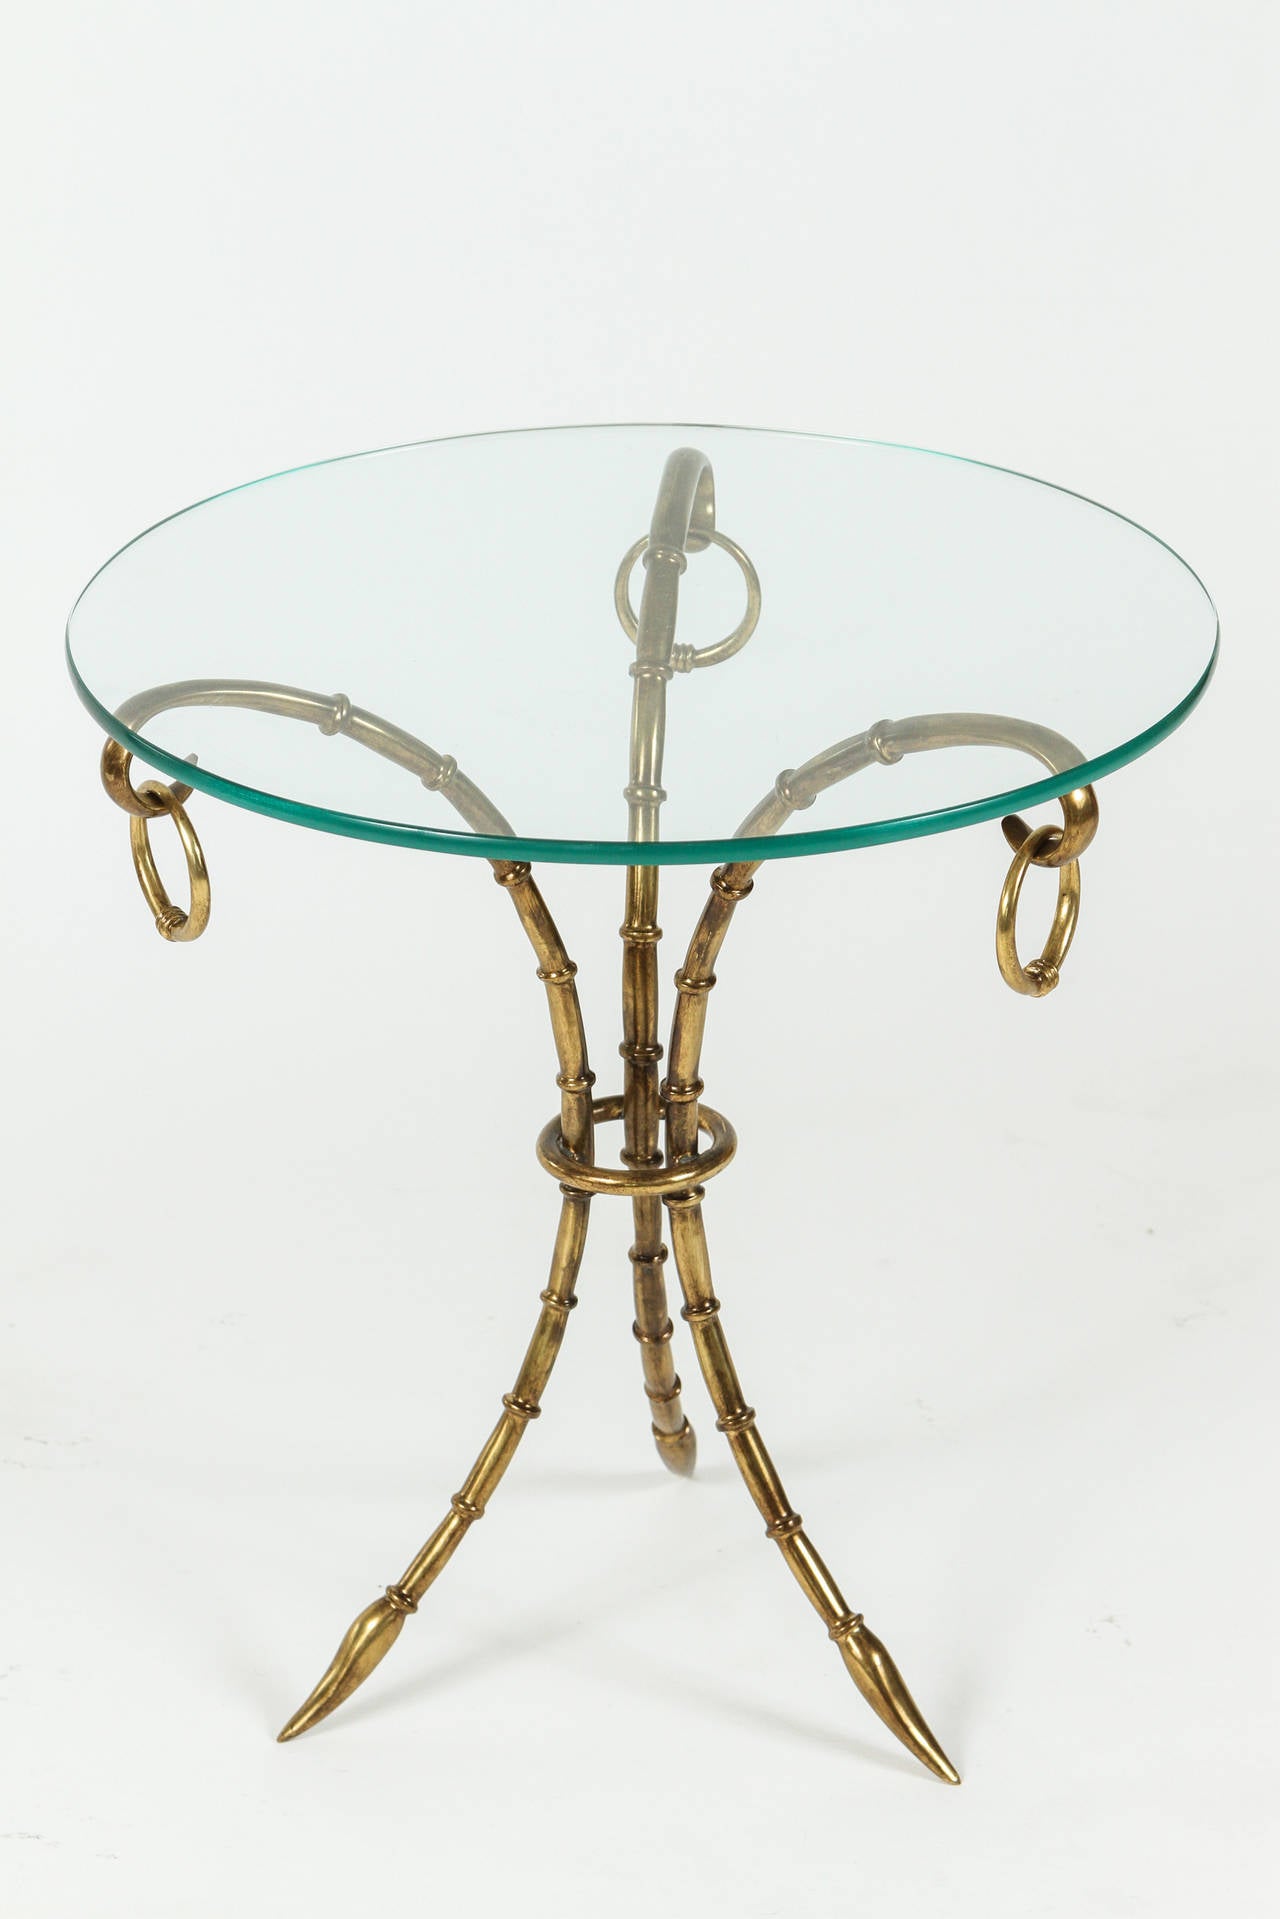 Lovely little side table with a stylized 